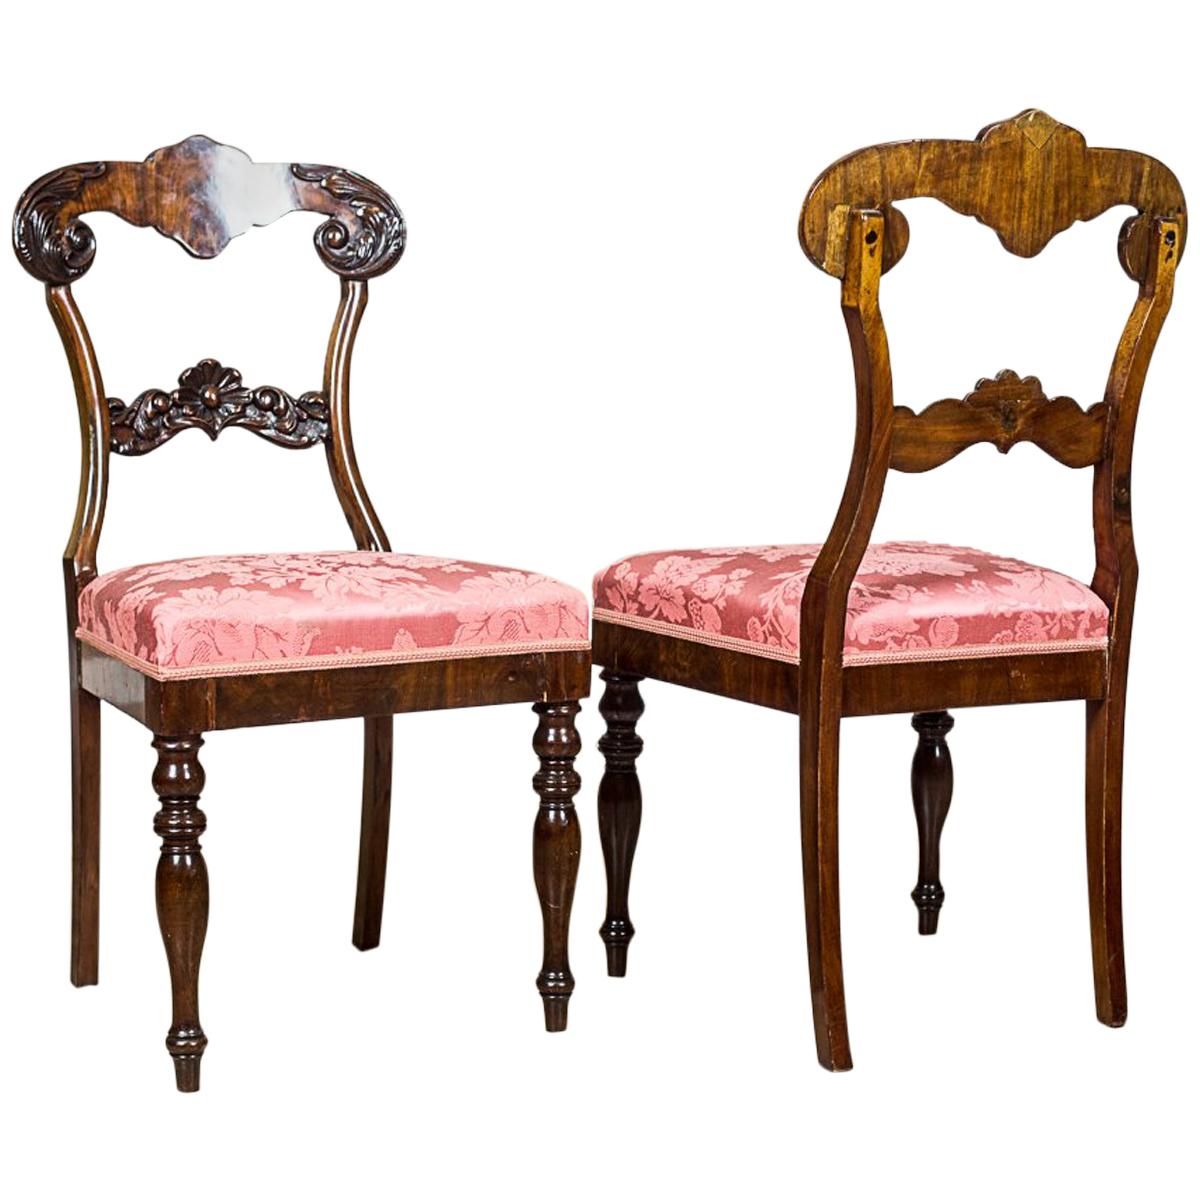 Eclectic Walnut Chairs from the End of the 19th Century